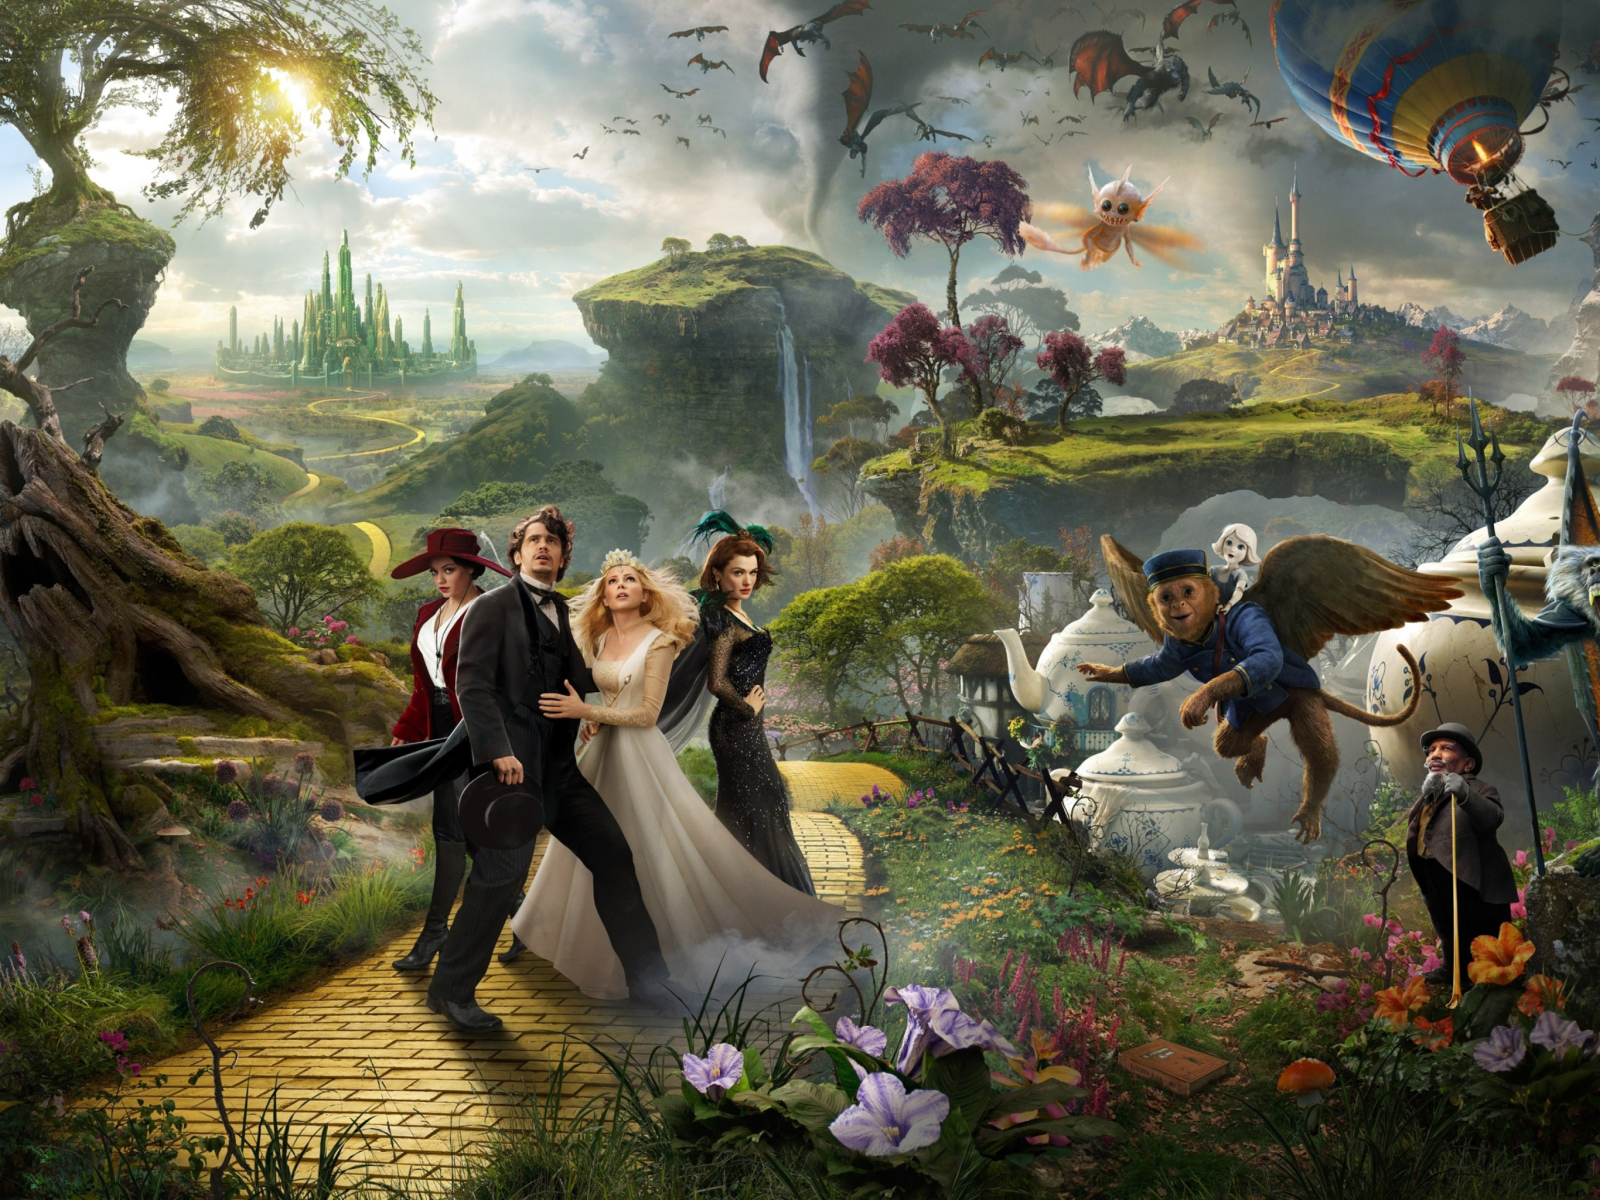 Das Oz The Great And Powerful 2013 Movie Wallpaper 1600x1200